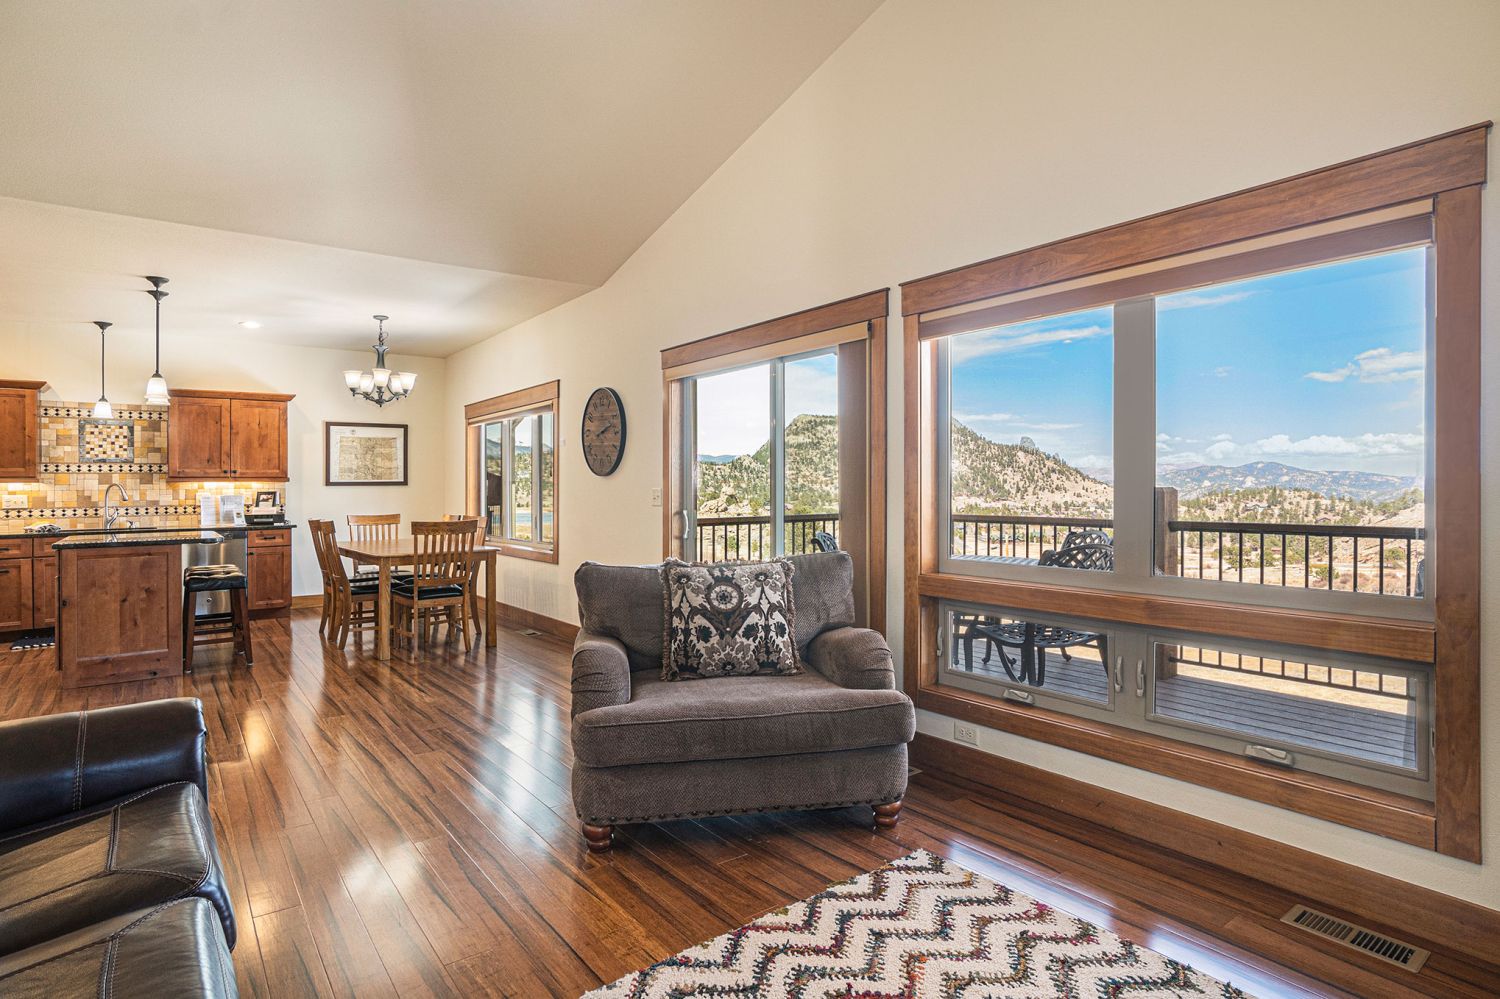 Coyote Ridge - Welcome to this open living room/kitchen area with views of the surrounding mountains. 